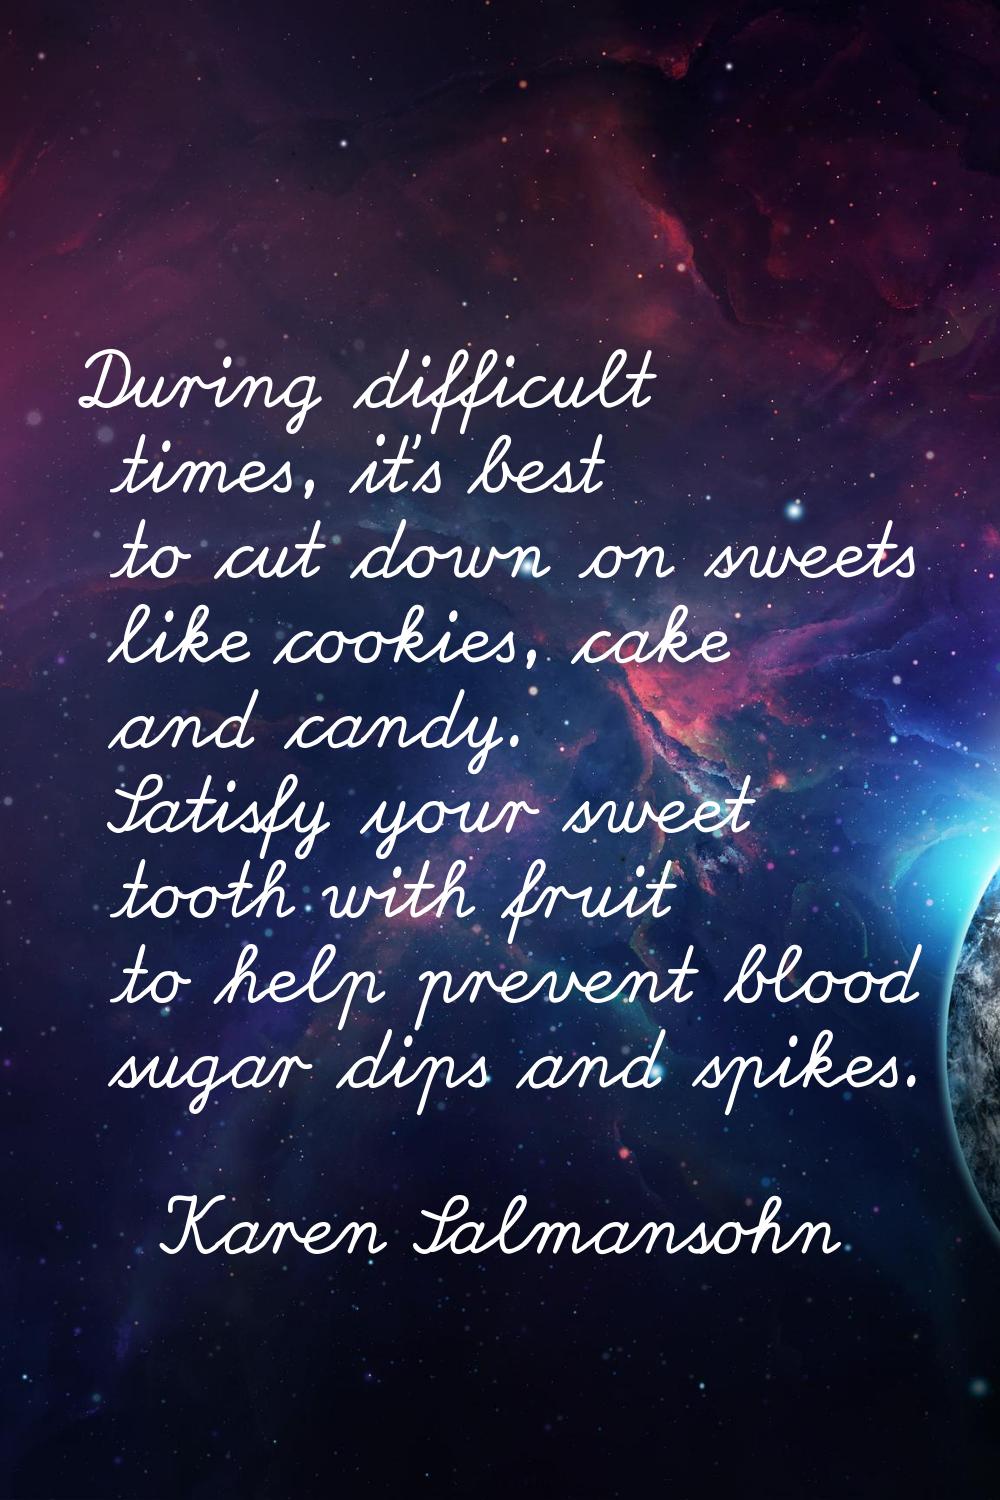 During difficult times, it's best to cut down on sweets like cookies, cake and candy. Satisfy your 